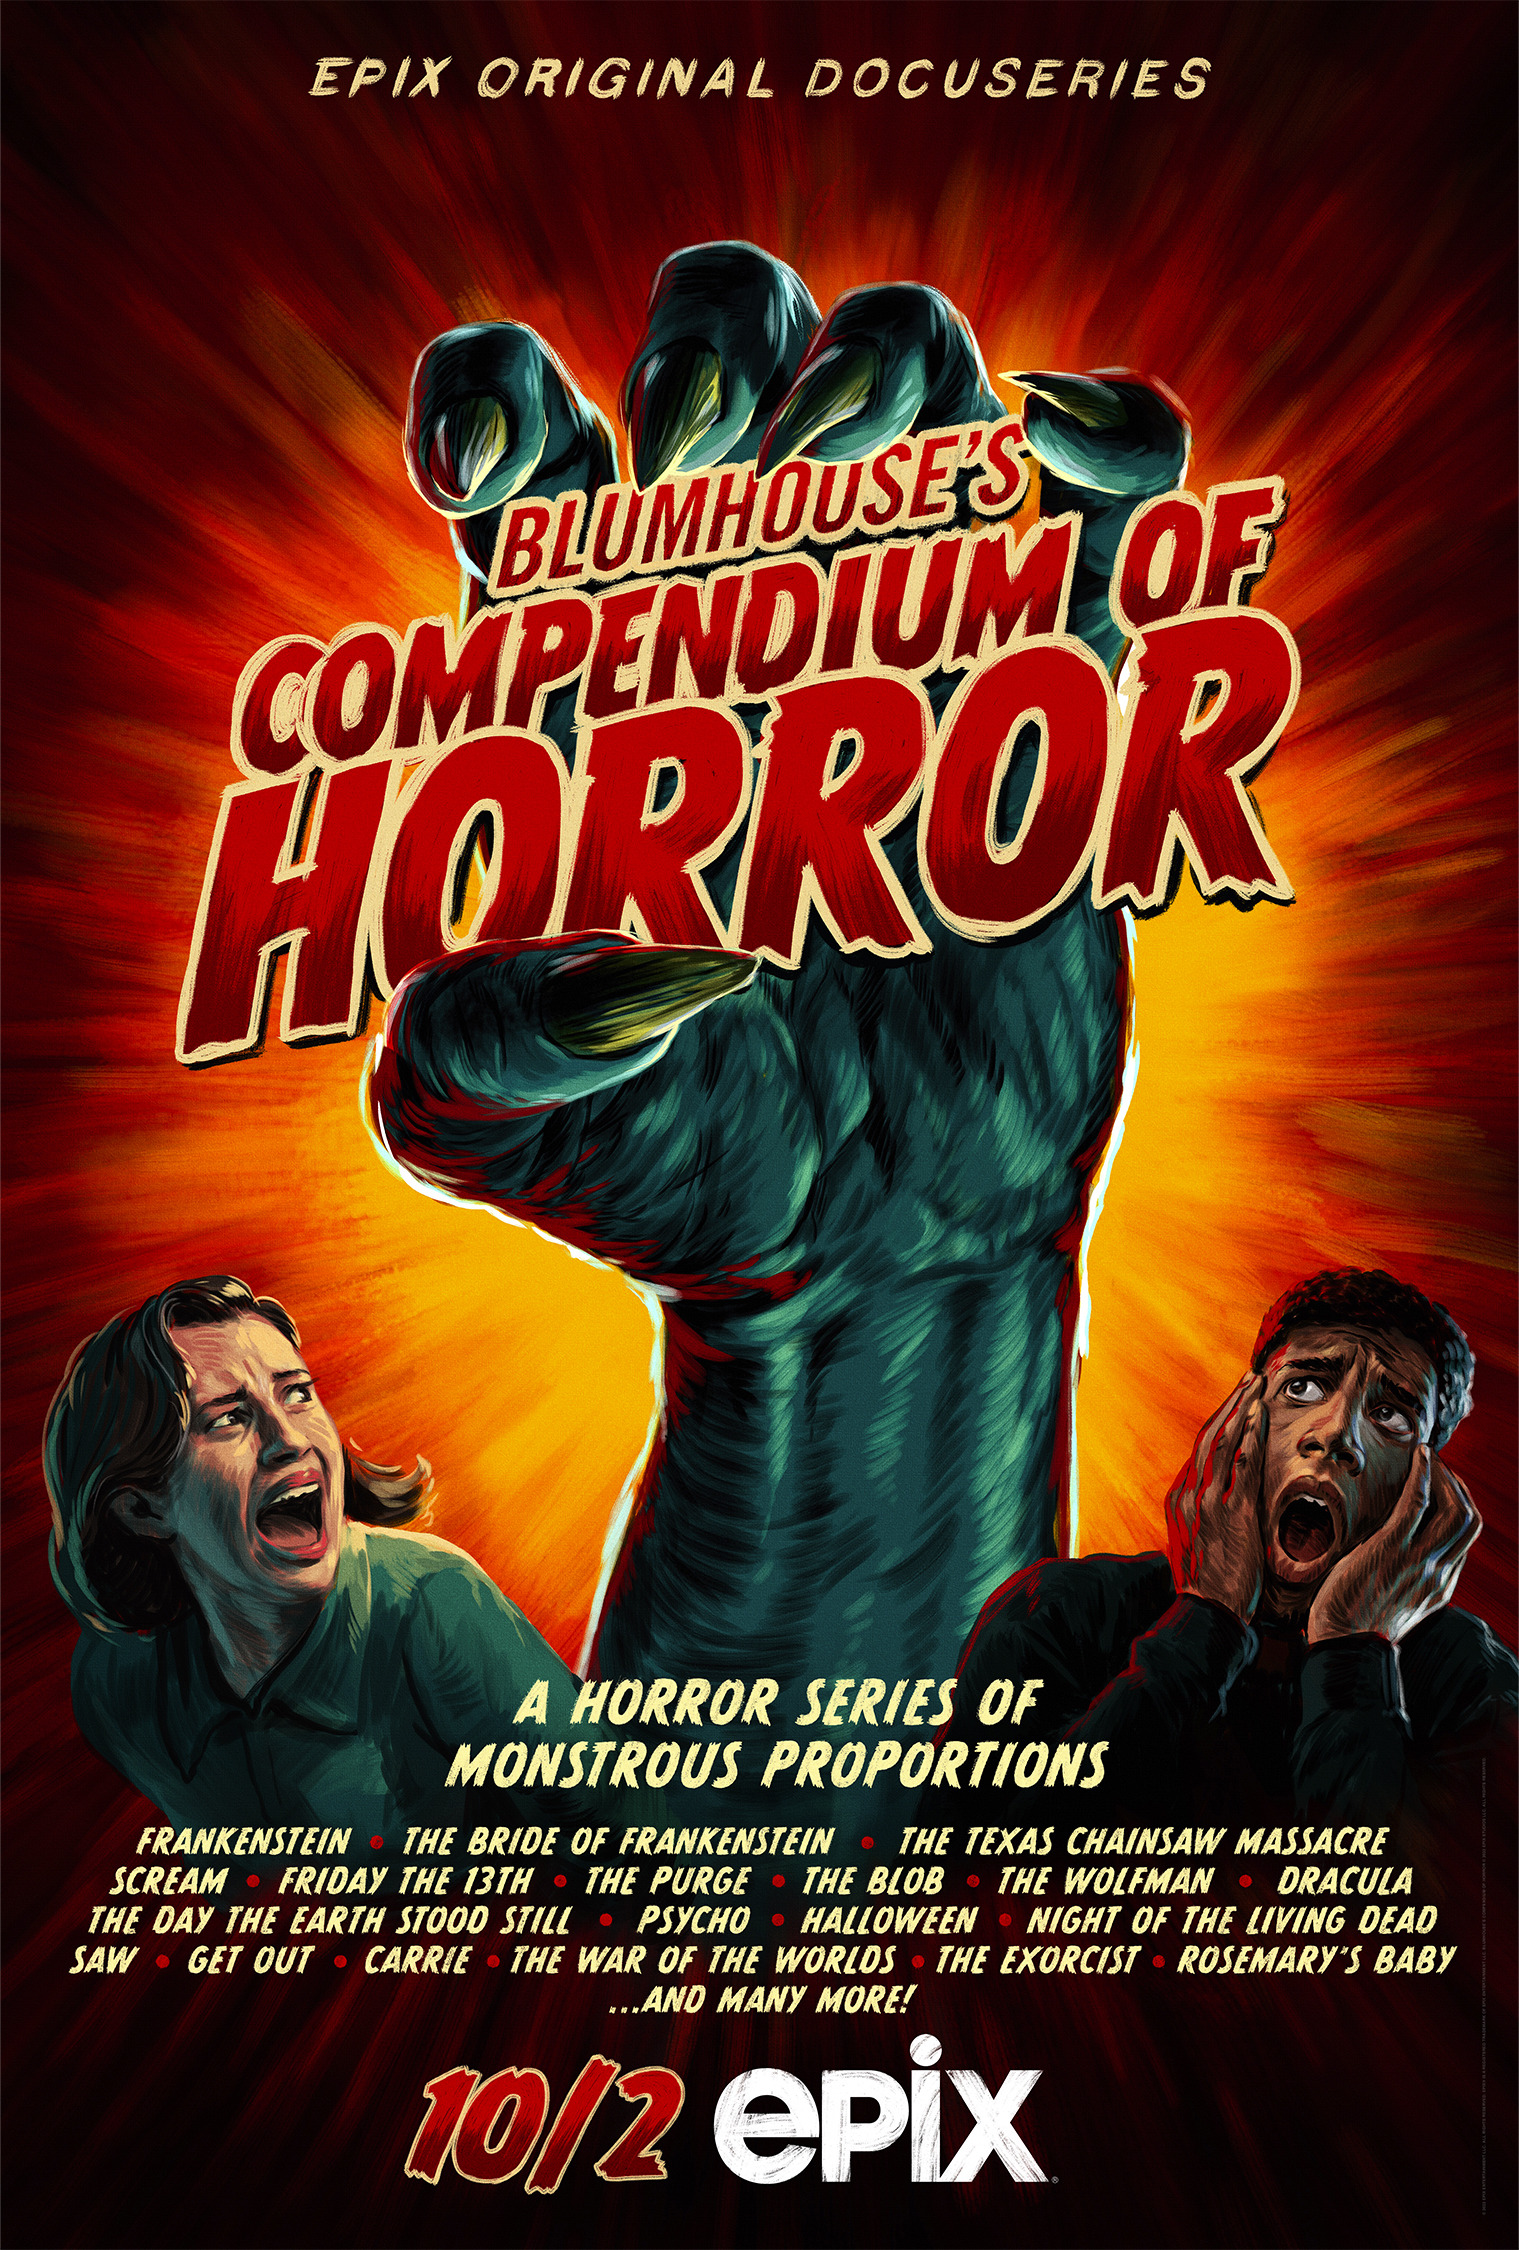 Mega Sized TV Poster Image for Blumhouse's Compendium of Horror 